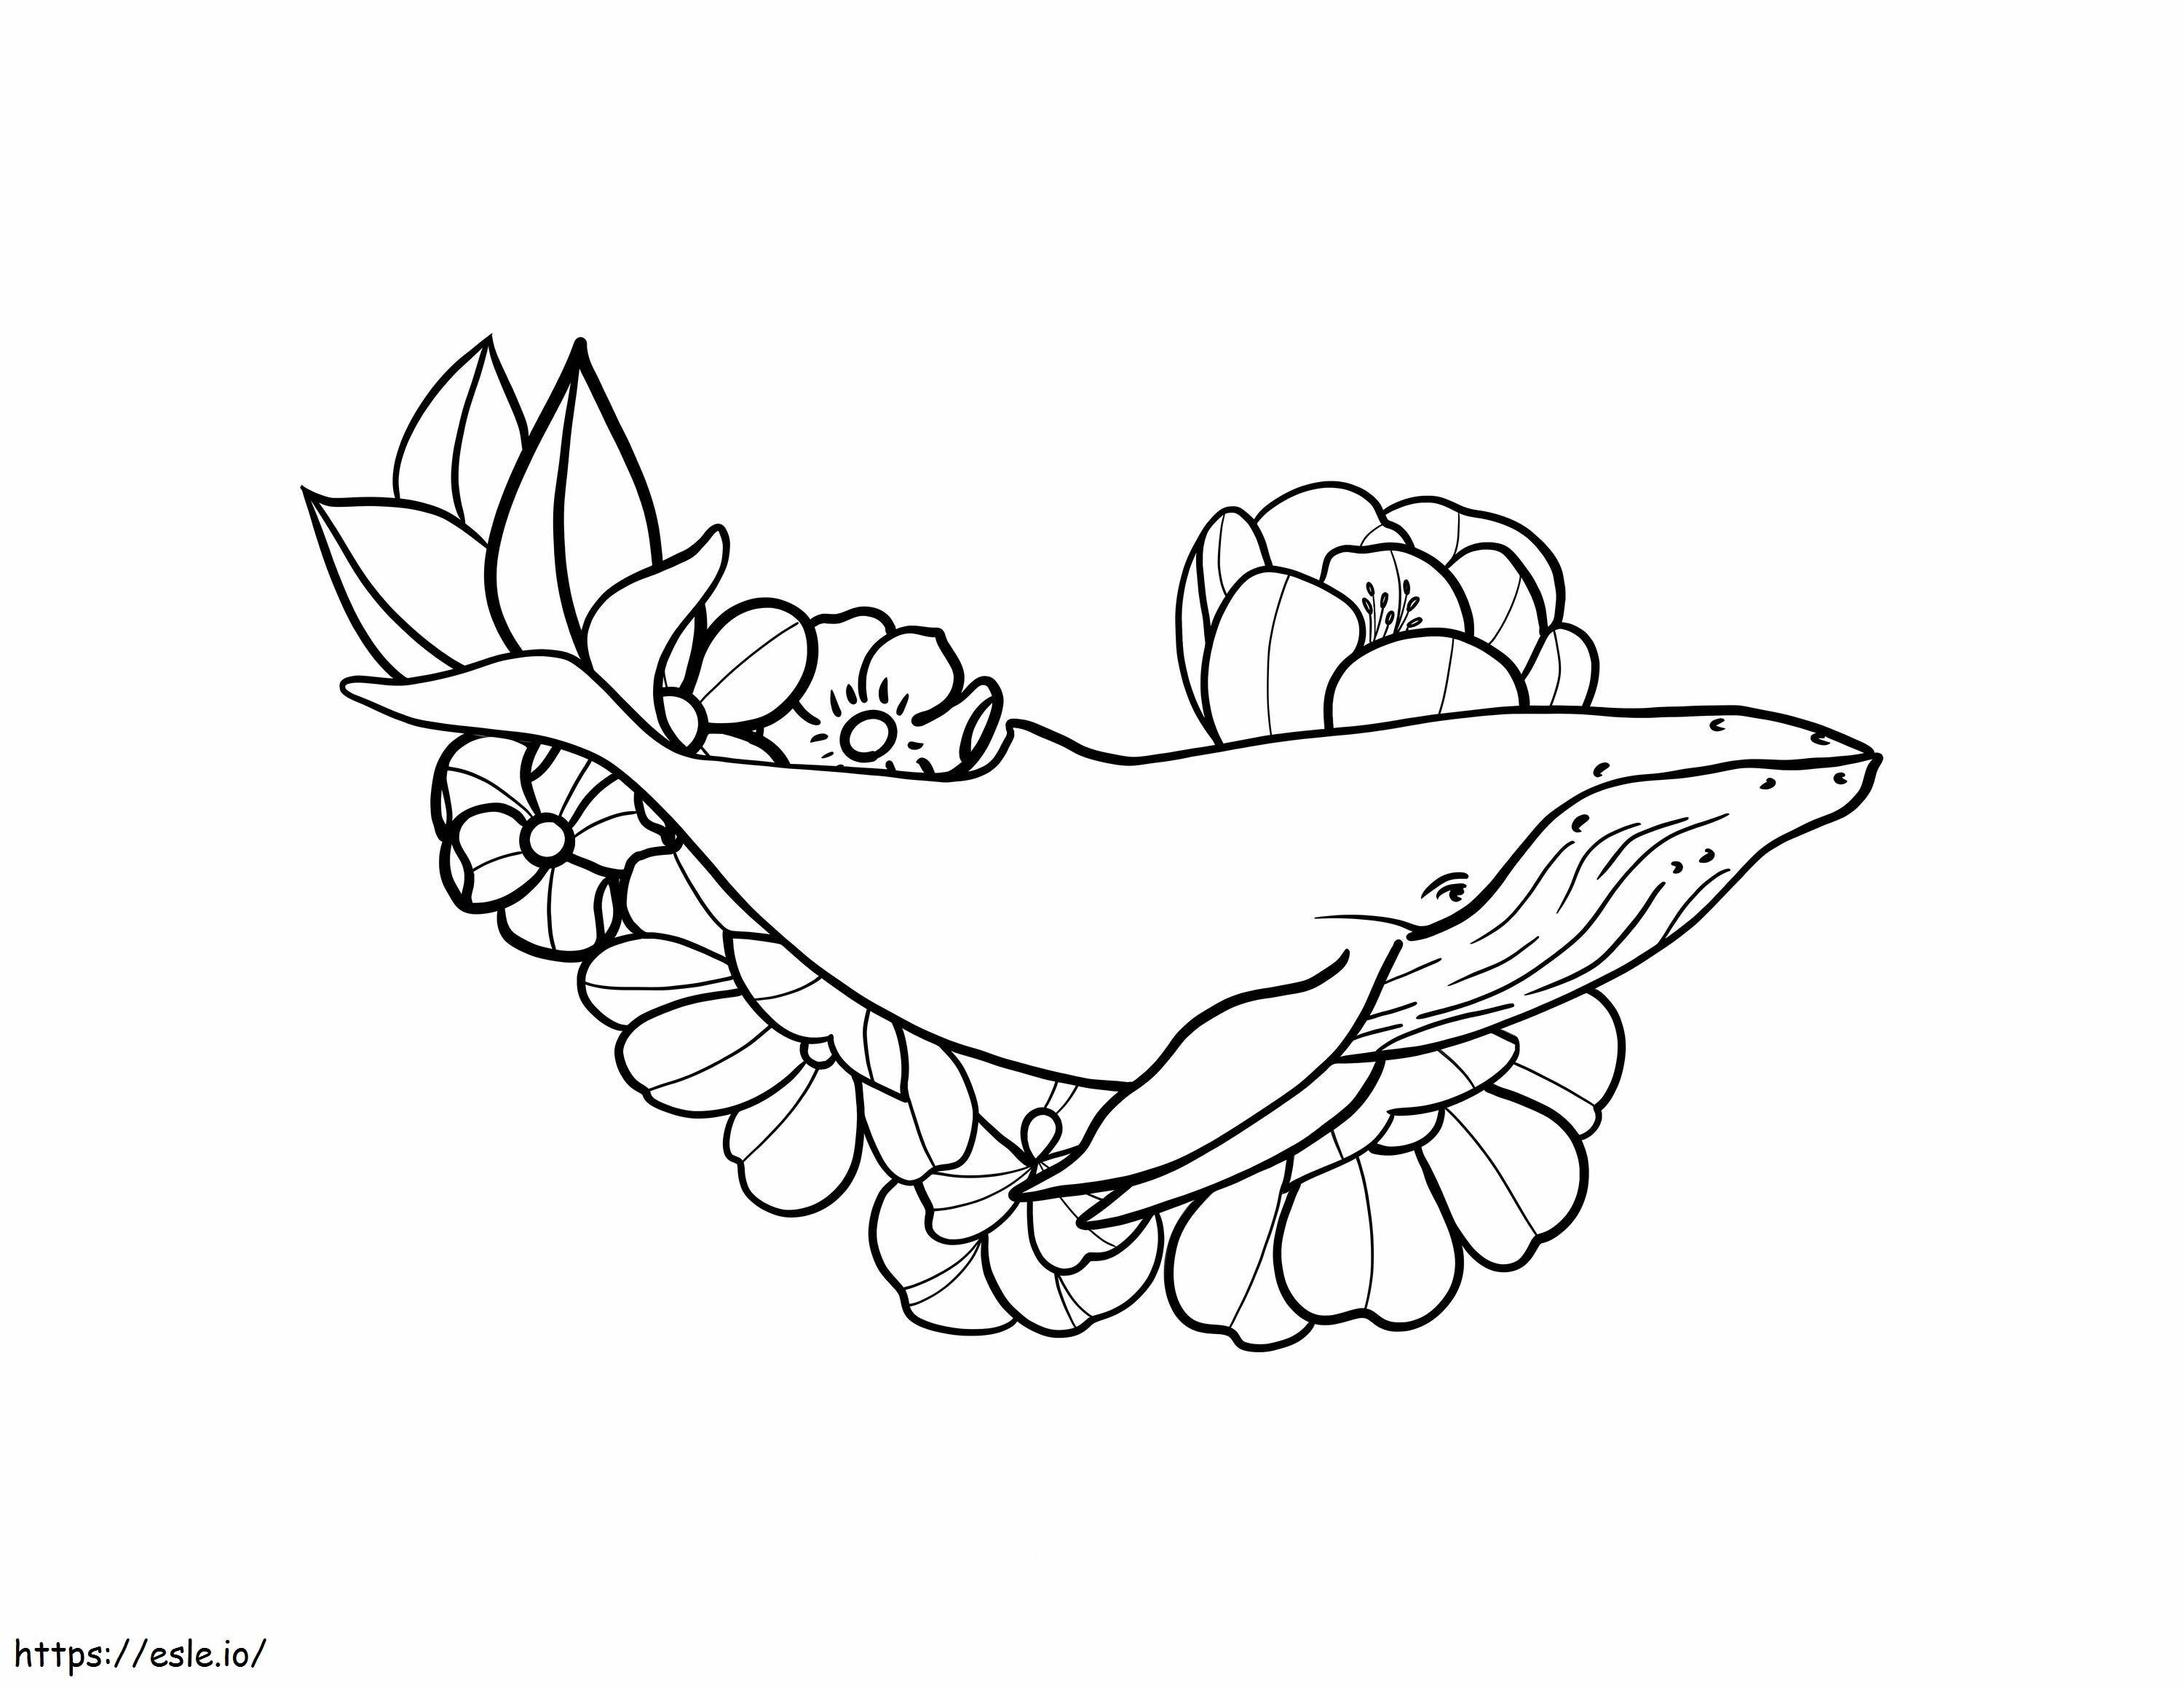 Whale With Flowers coloring page